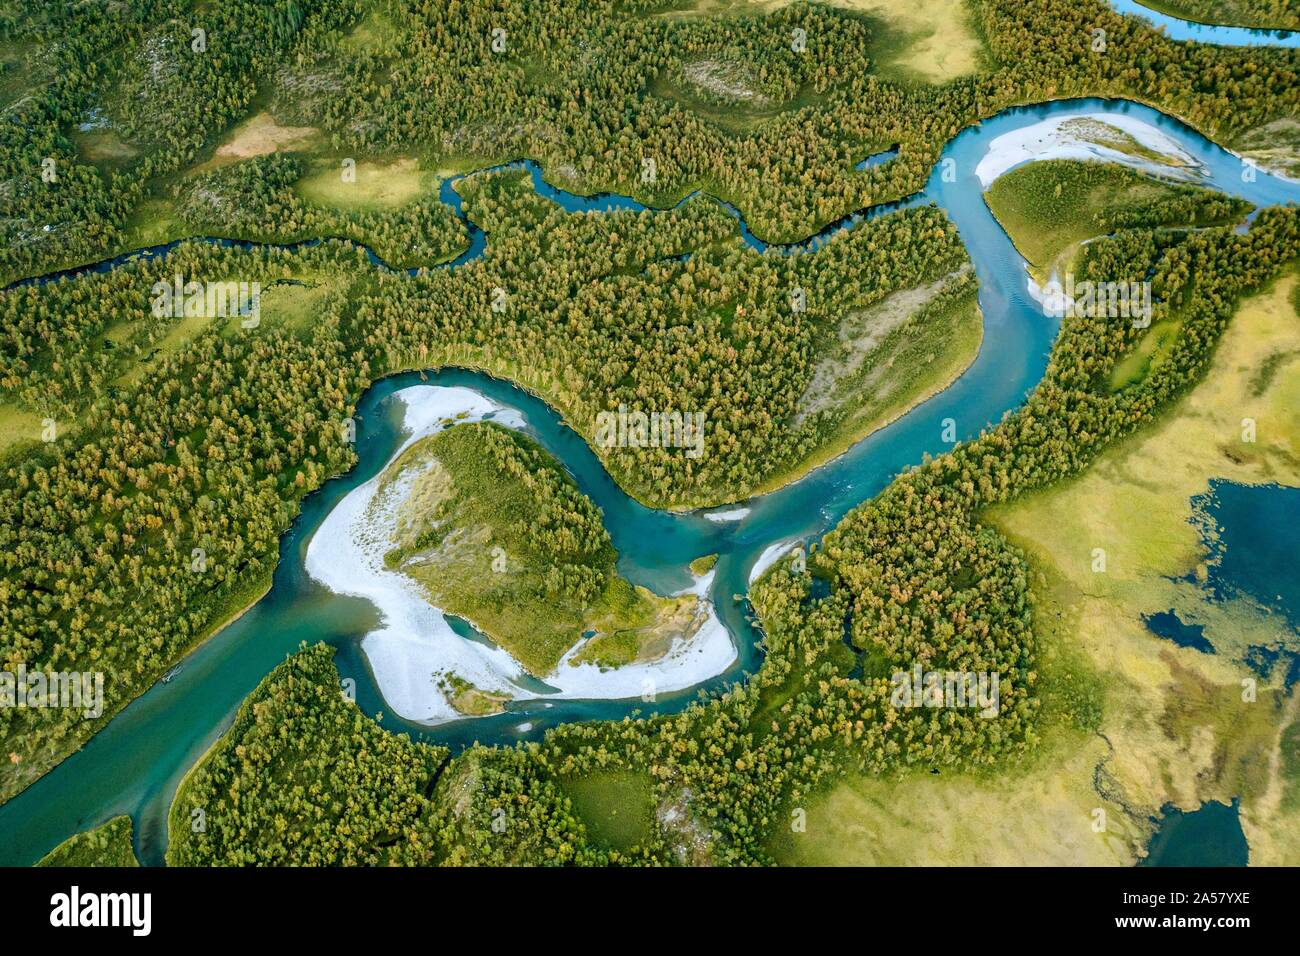 Aerial view, meandering river landscape in the Rapa Valley near Kebnekaise, Sarek National Park, Norrbottens lan, Sweden Stock Photo